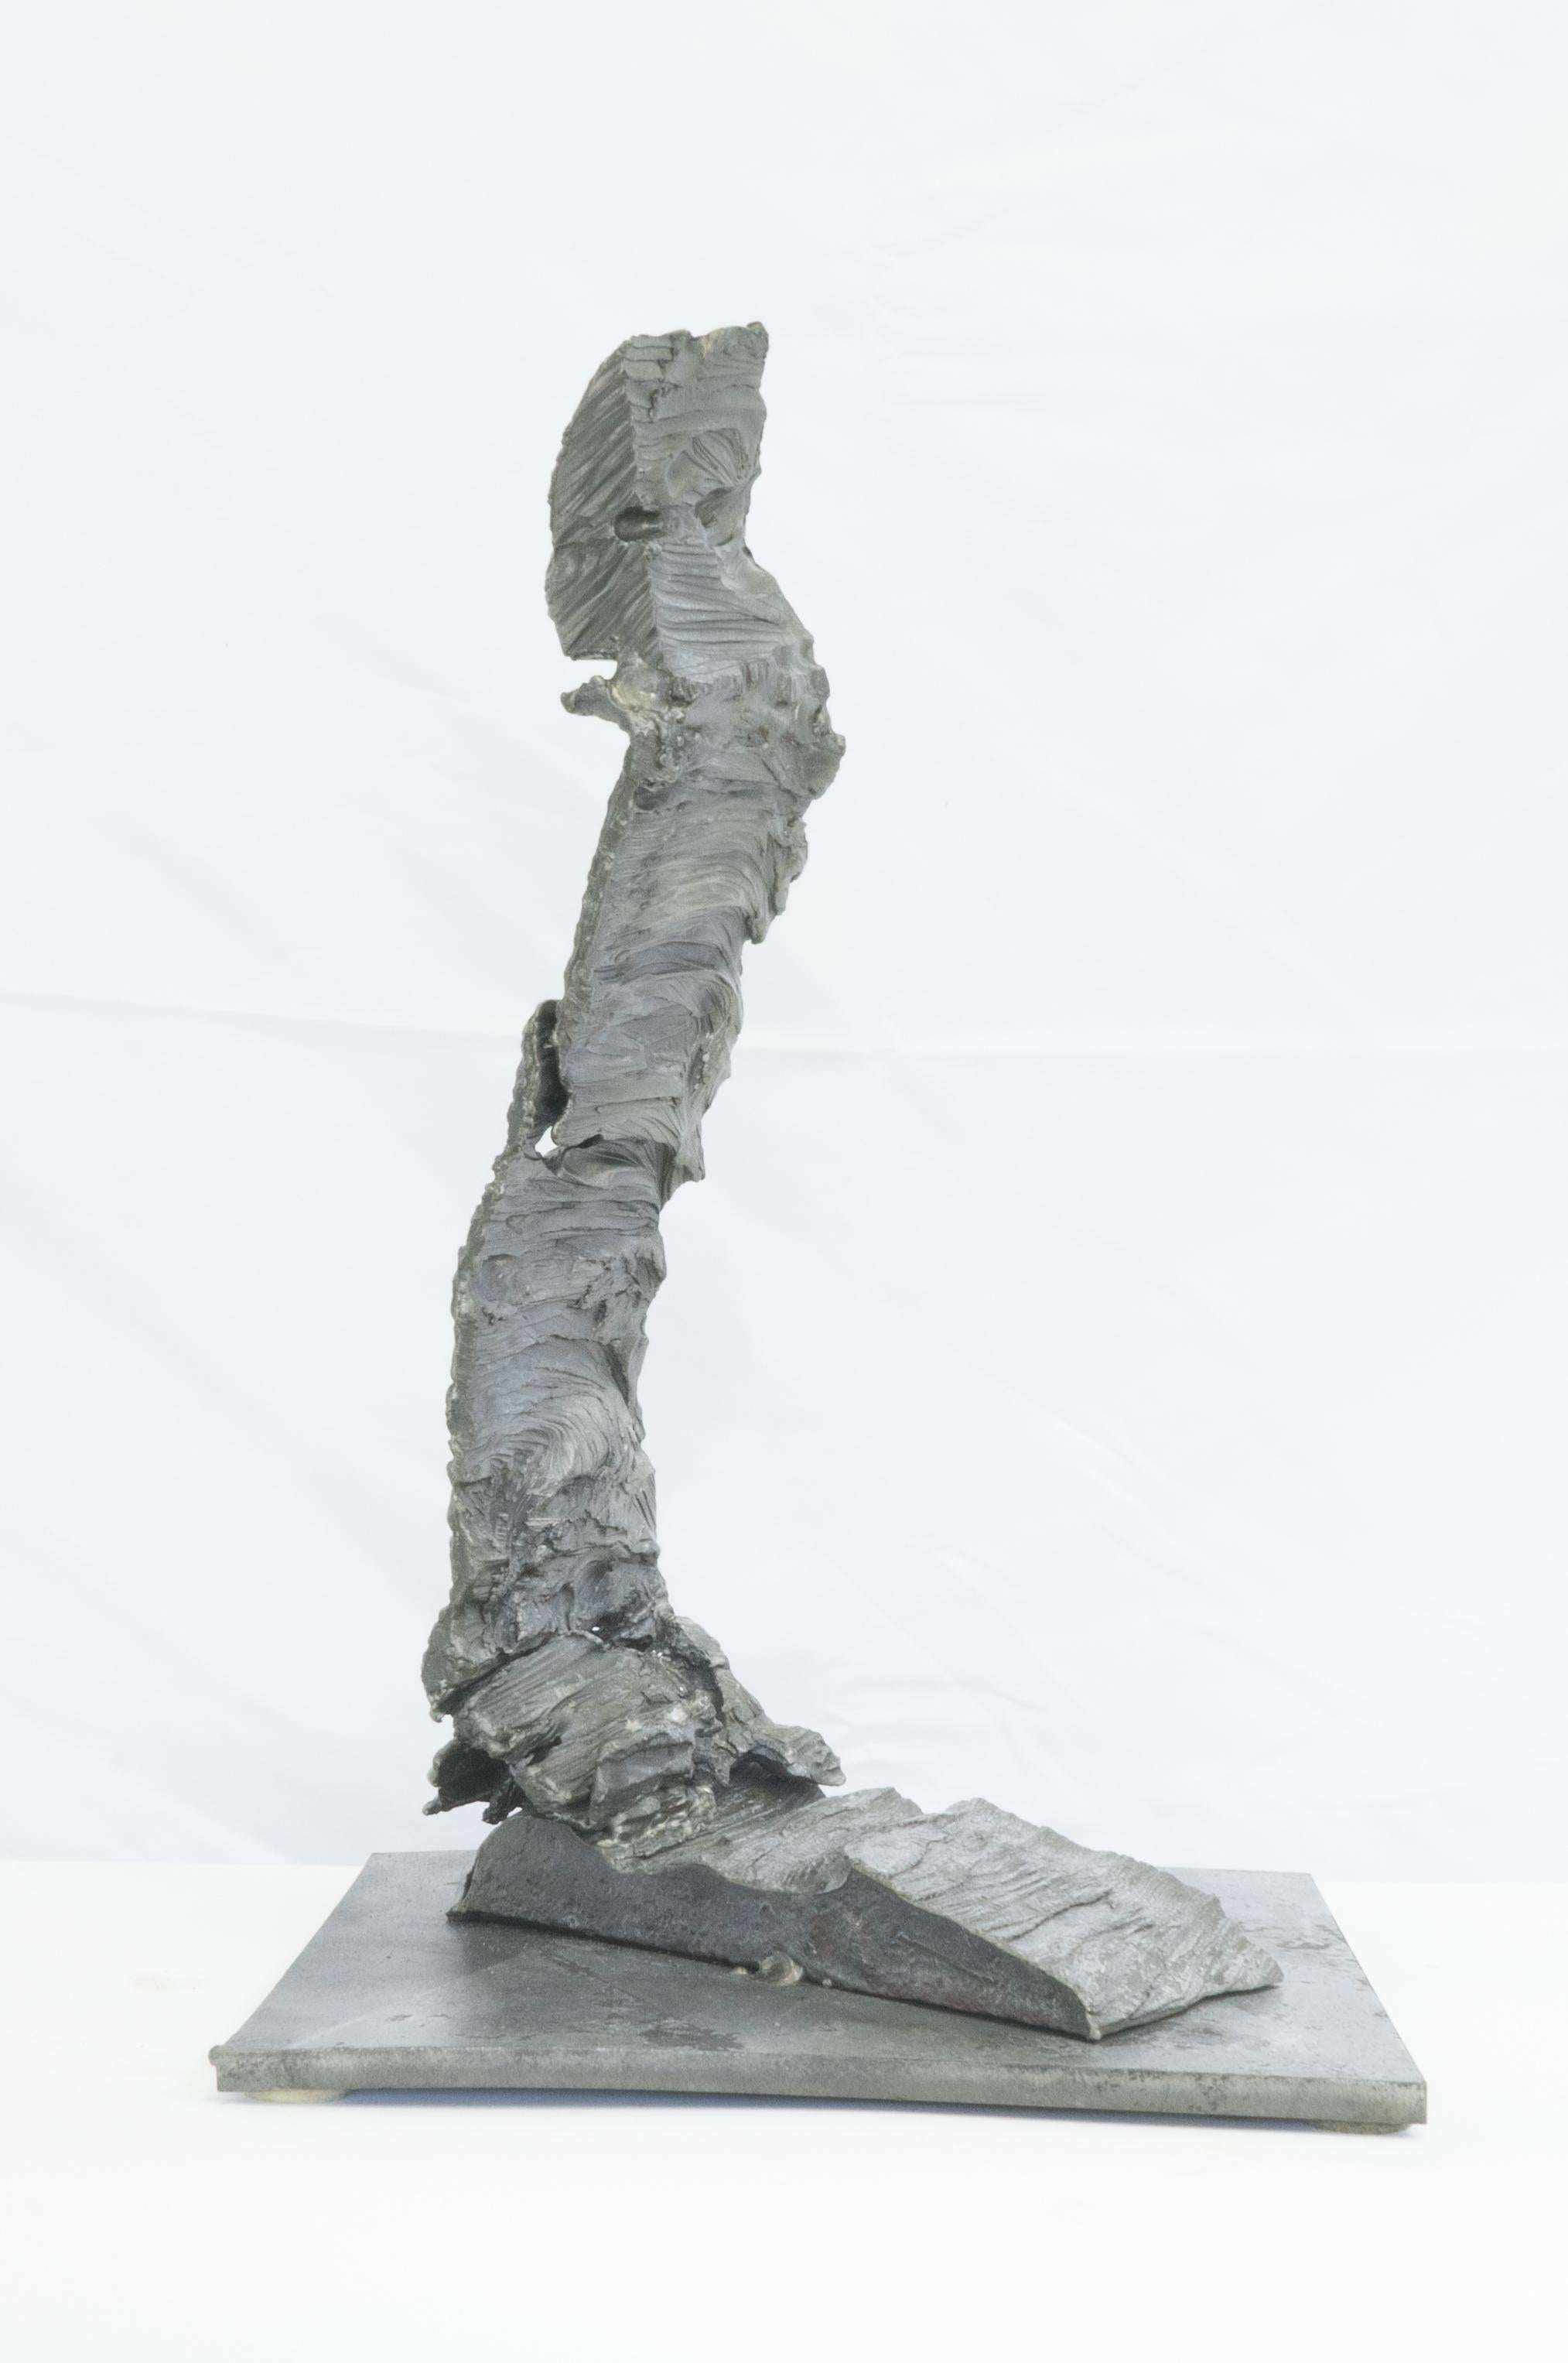 Carved Earth Series, 21st century, cast bronze, contemporary metal sculpture- Carved Earth Series, foot sculpture, by David Edelman. 

- Cast bronze, limited edition.

Dimensions:
- L: 14”
- W: 3.75”
- H: 9”

Artist: David Edelman, Represented by